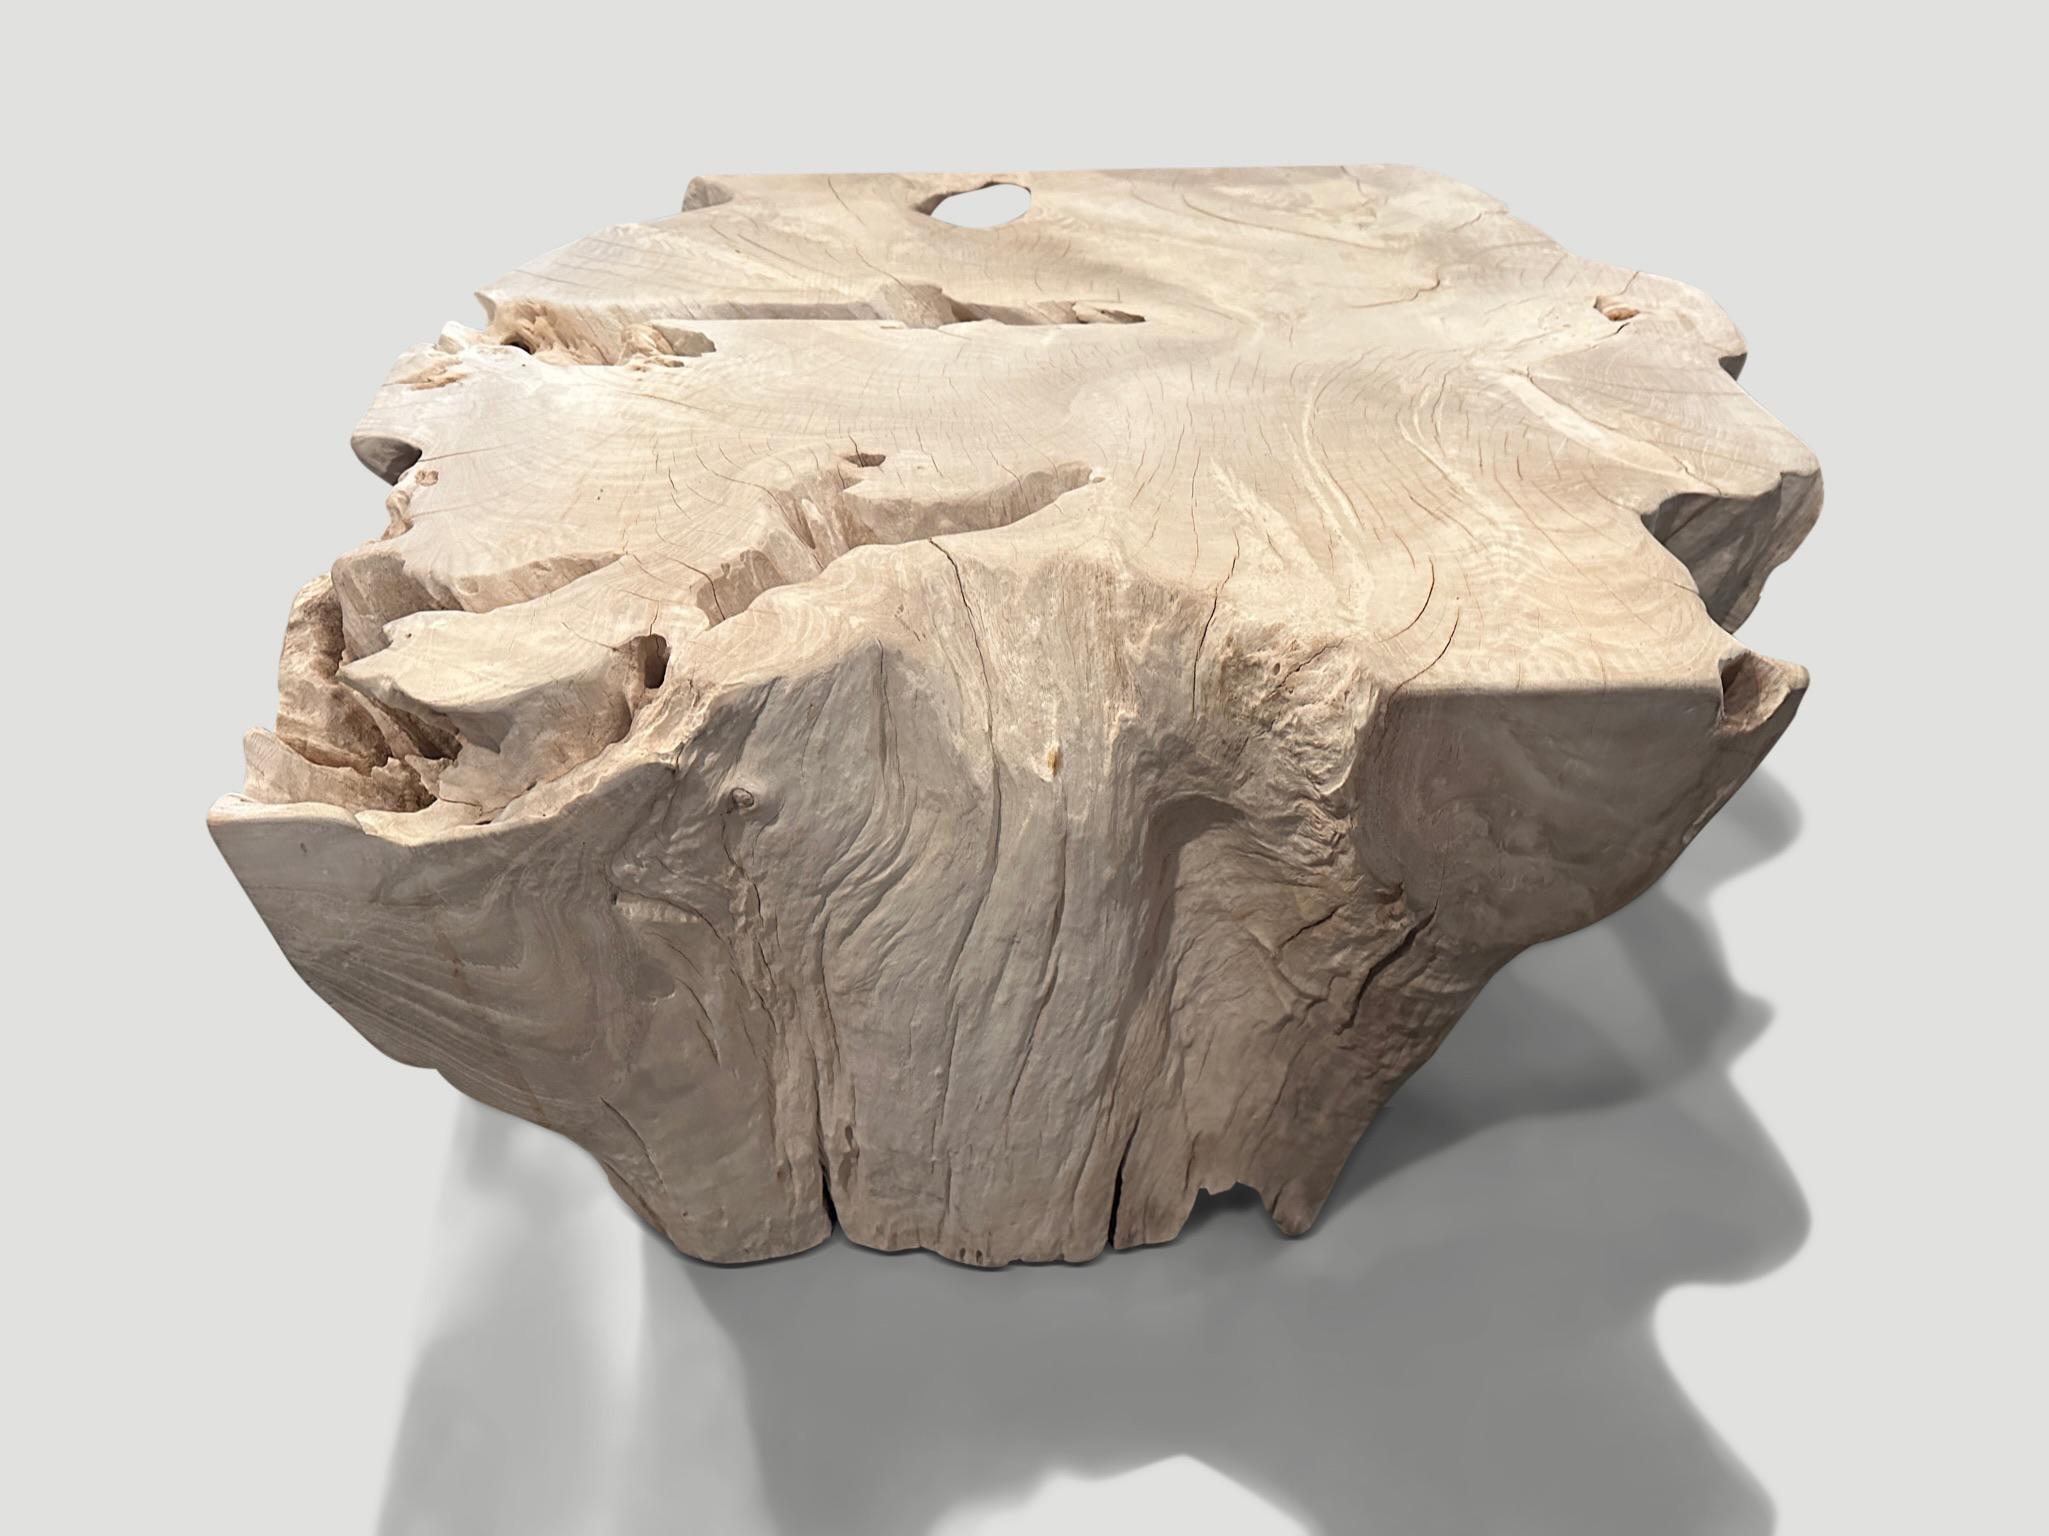 Impressive teak root coffee table or pedestal with beautiful detail on the sides and top. Both sculptural and functional. We bleached the wood and added a light white wash revealing the stunning wood grain. 

The St. Barts Collection features an